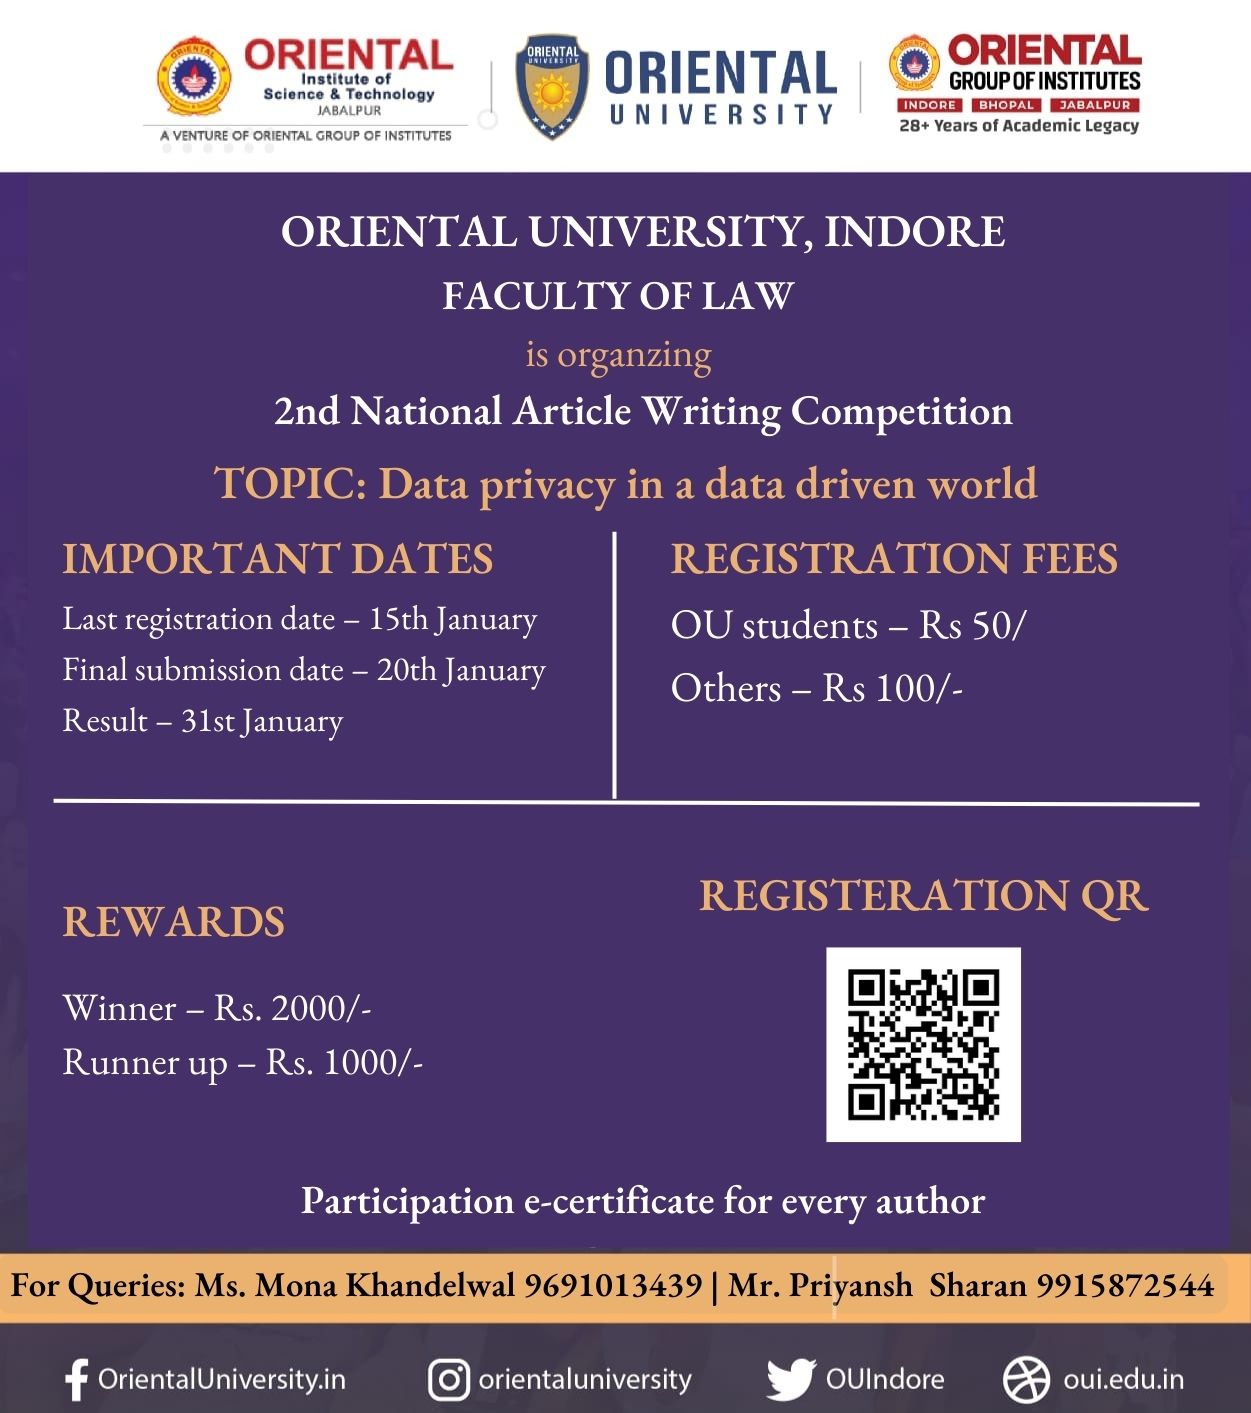 National Article Writing Competition Organised By Faculty of Law, Oriental University, Indore